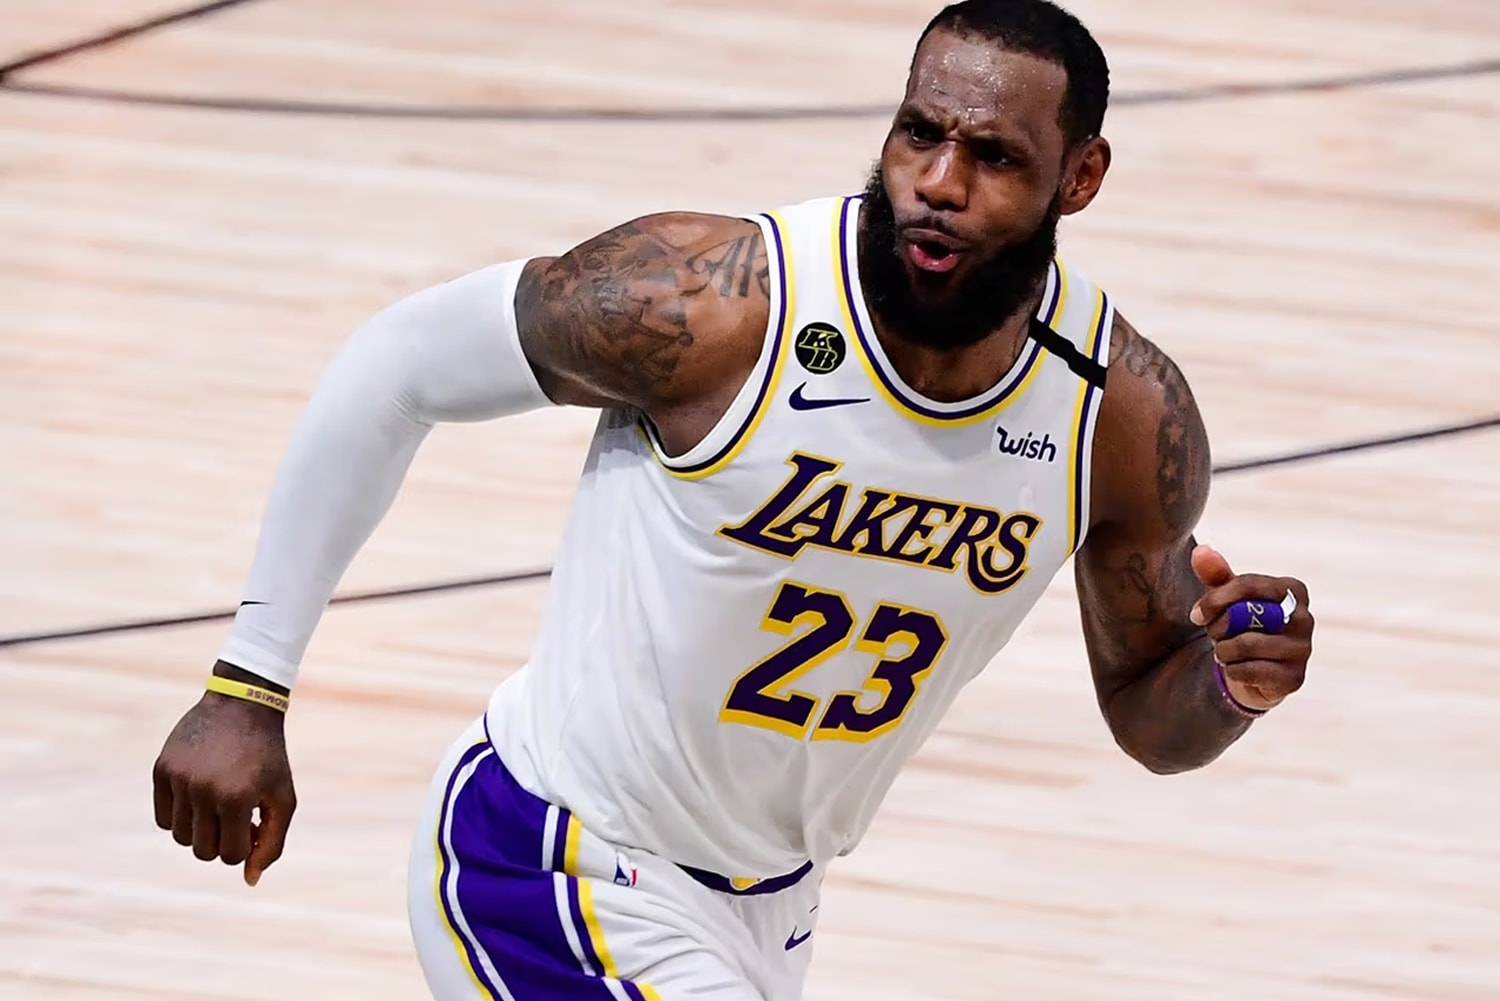 'WHATTT?': LeBron James’s hilarious reaction to officially being the oldest NBA player